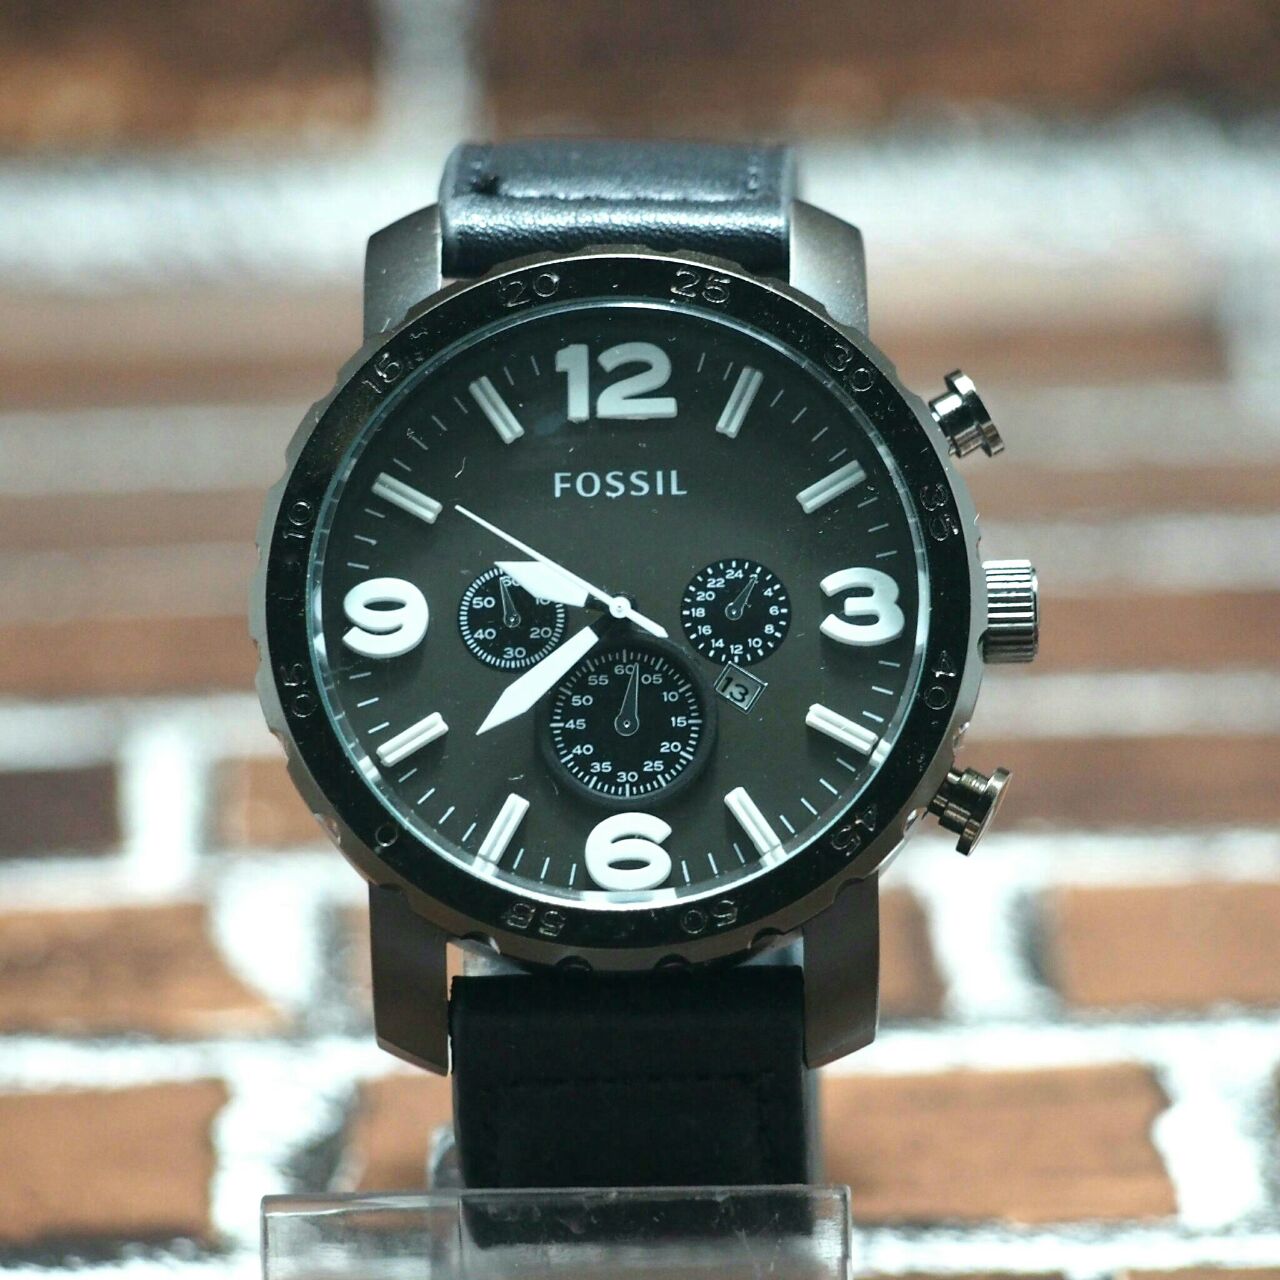 FOSSIL BLACK MEN LIMITED EDITION WATCH RM90 | The Time Mania by Amani Xara